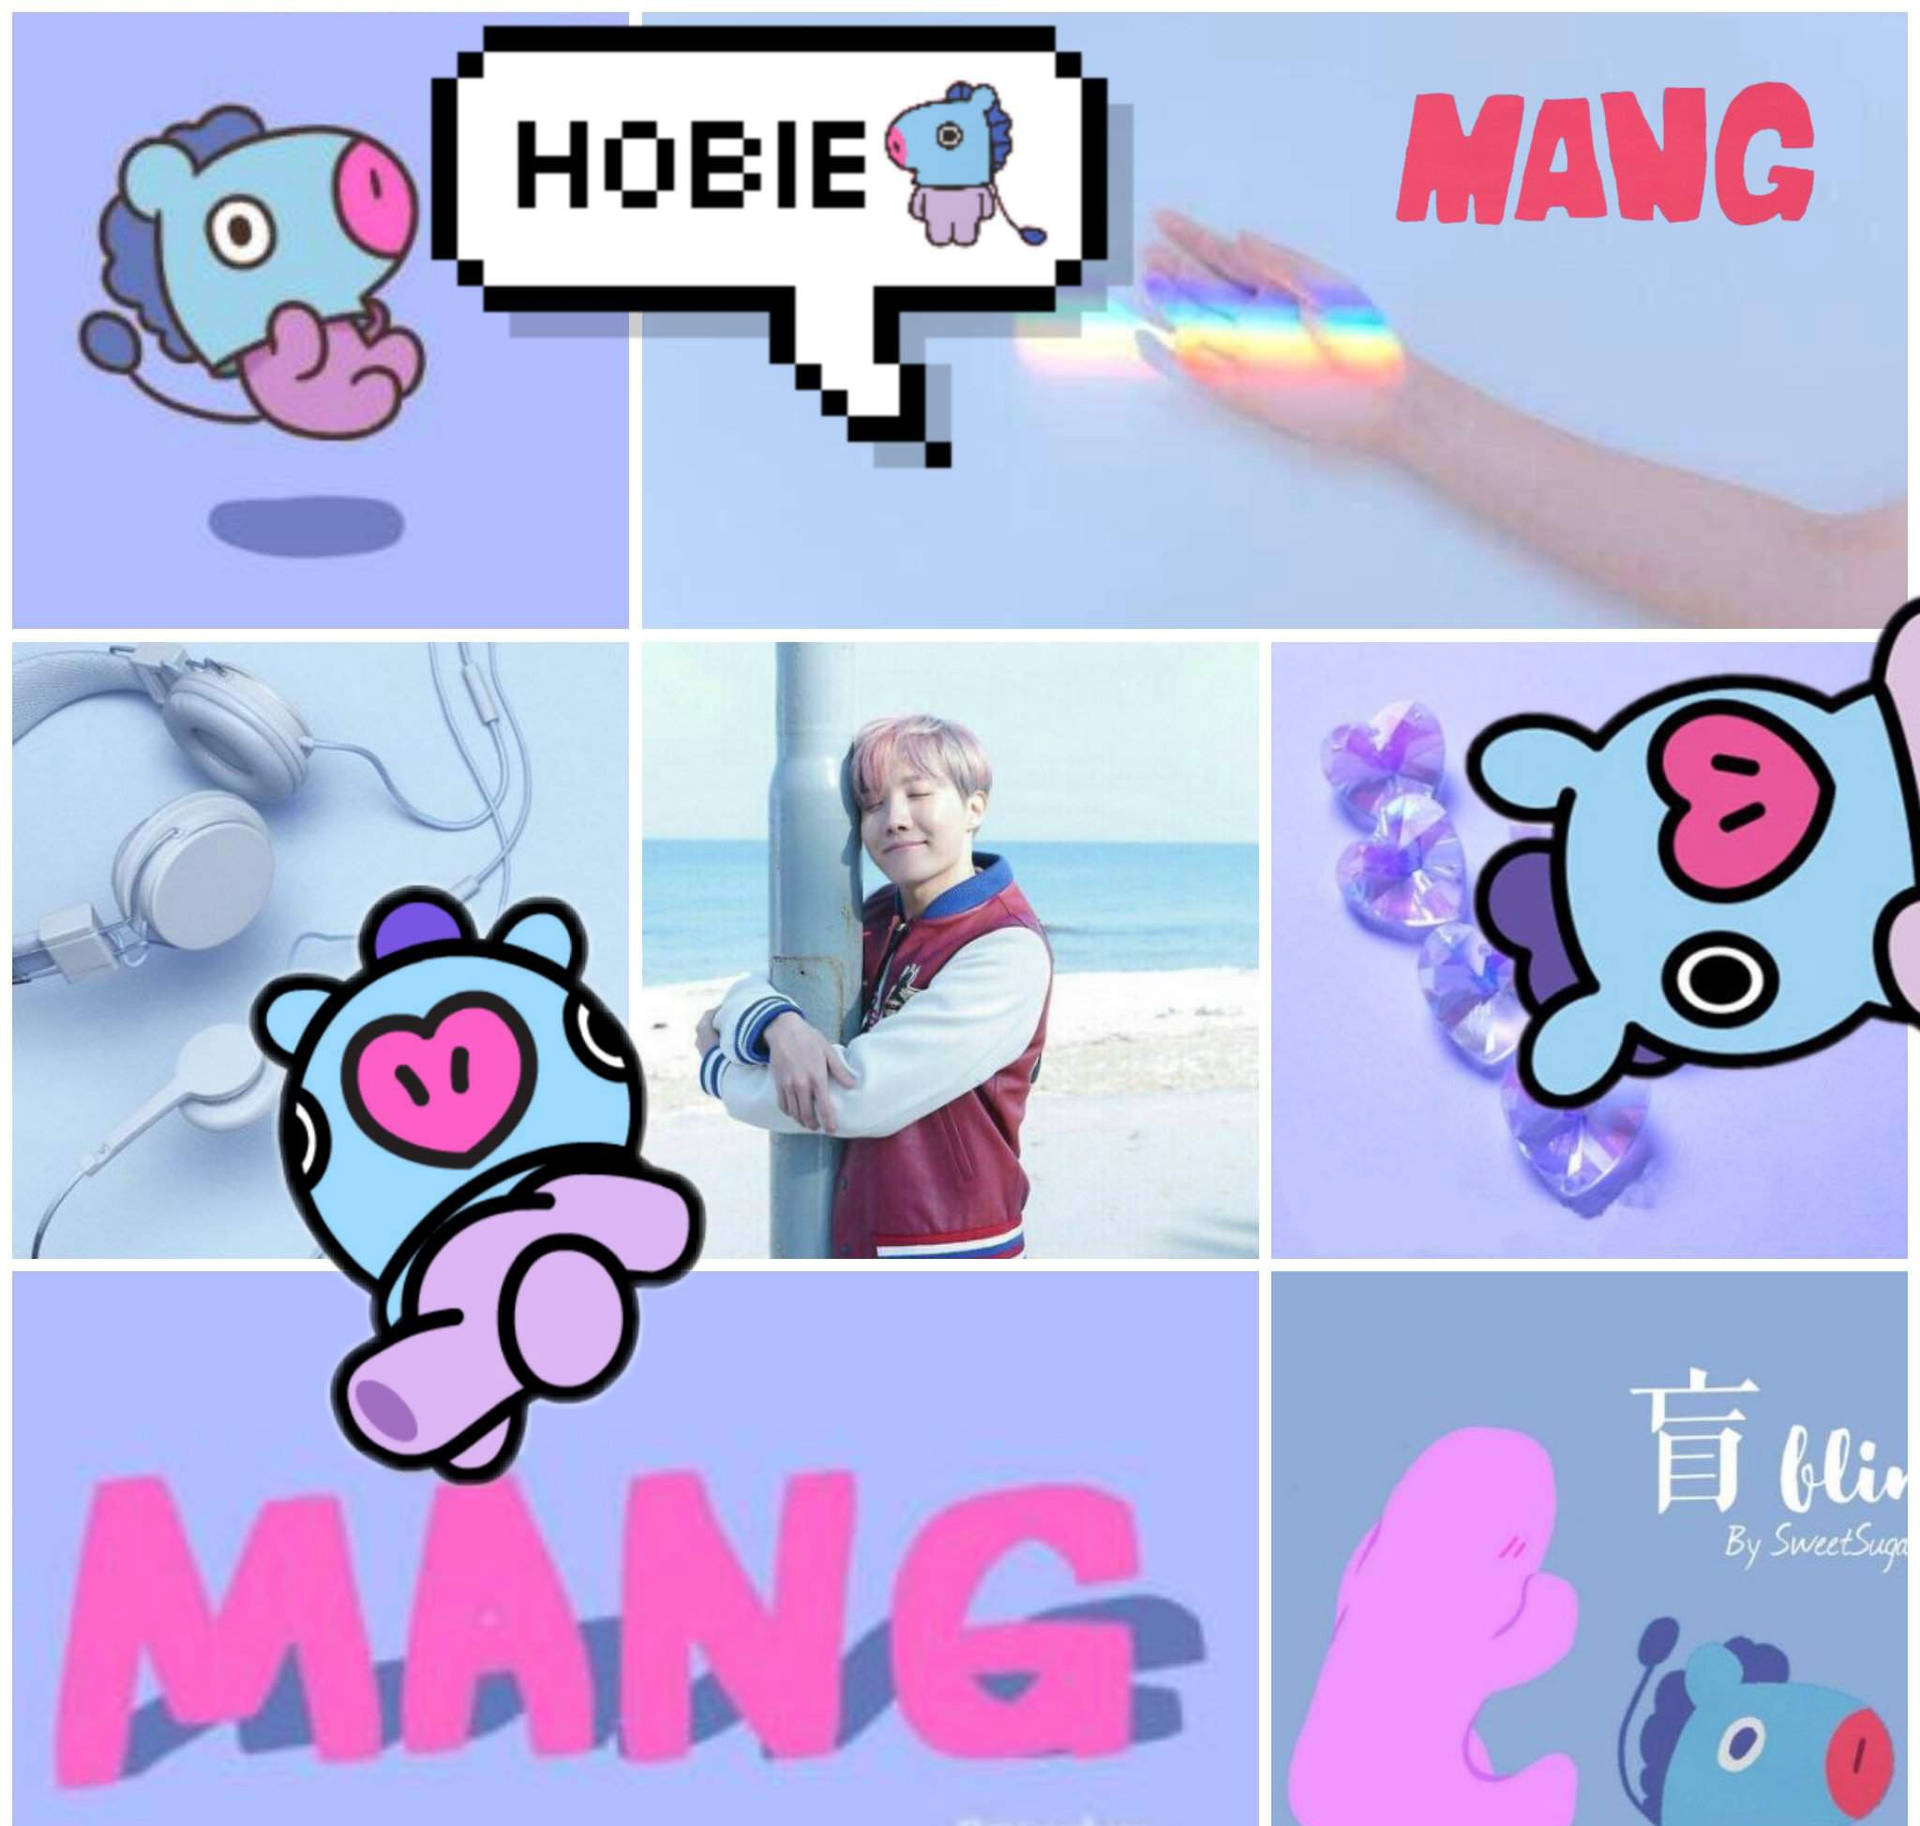 Hang Out With The Ever-adorable Mang Bt21 In This Bright And Playful Desktop Wallpaper. Wallpaper